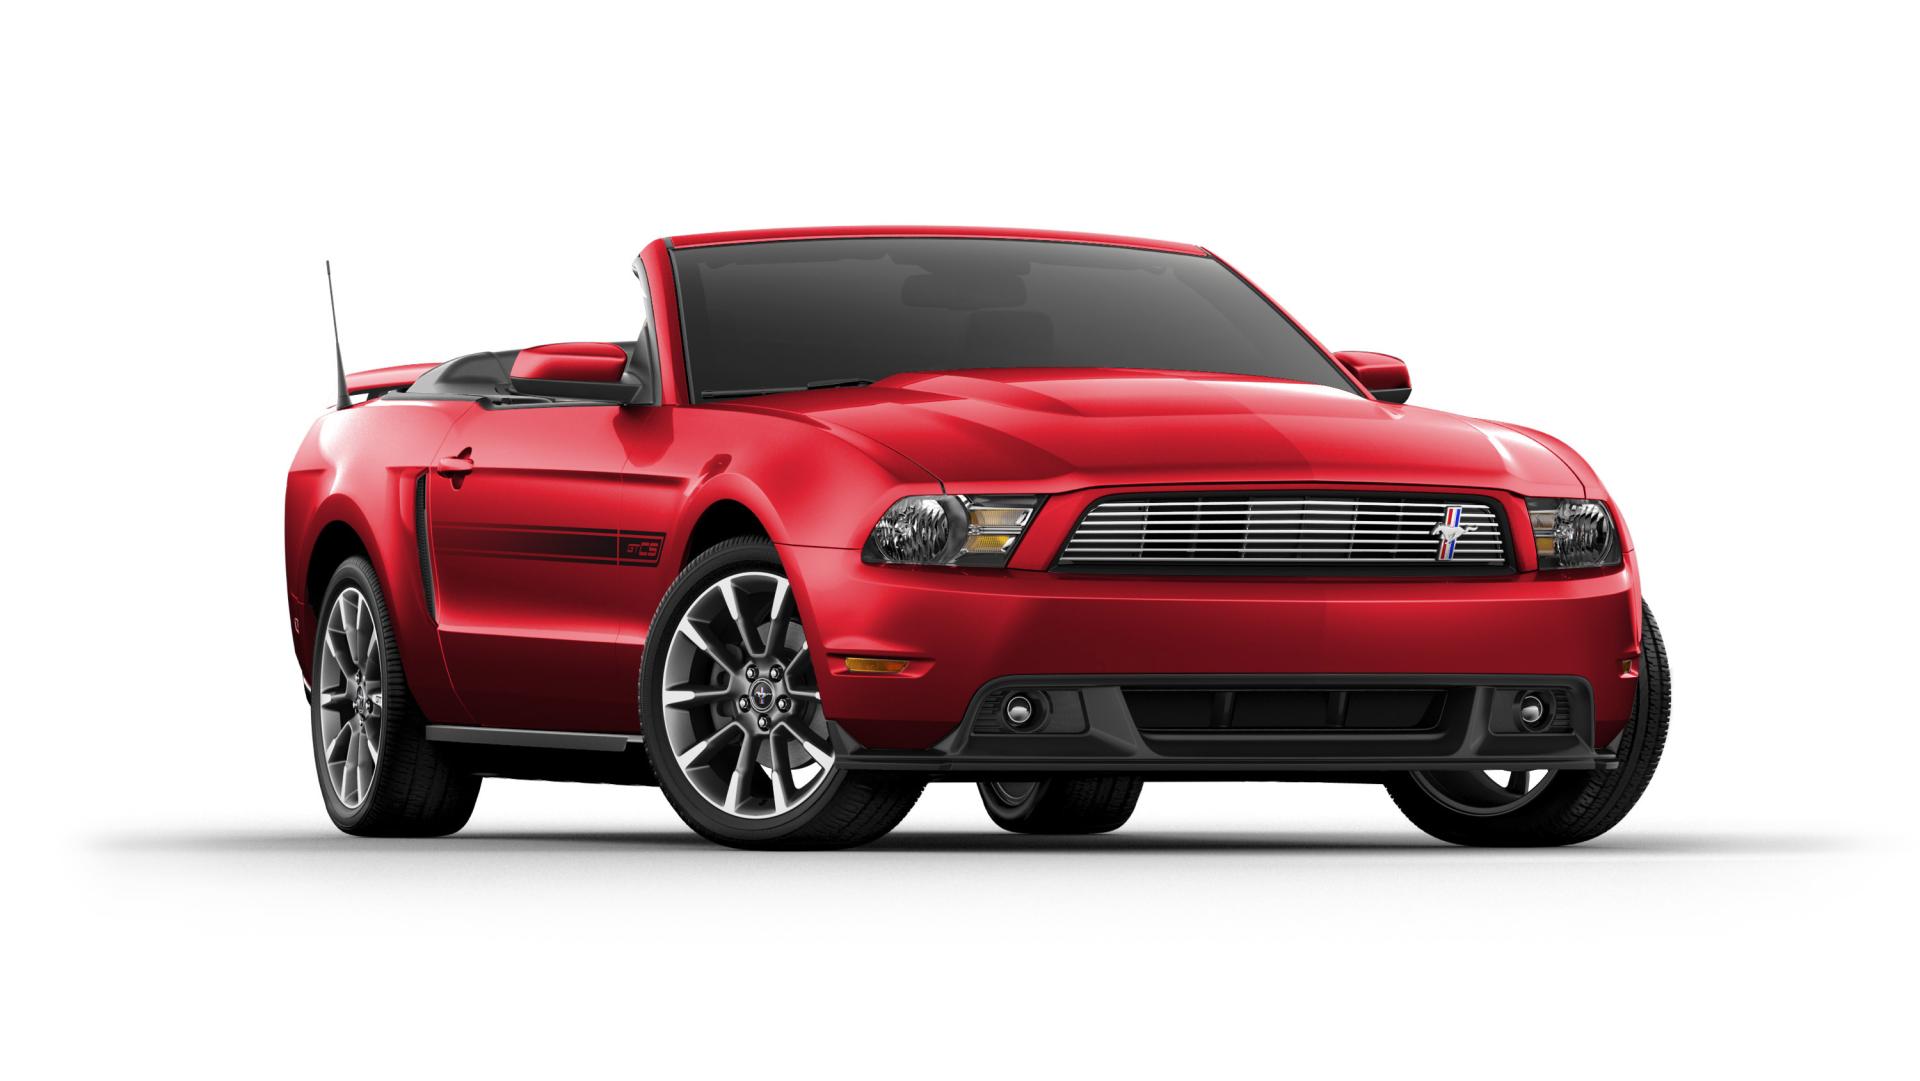 2012 Ford Mustang Image Photo 27 Of 28